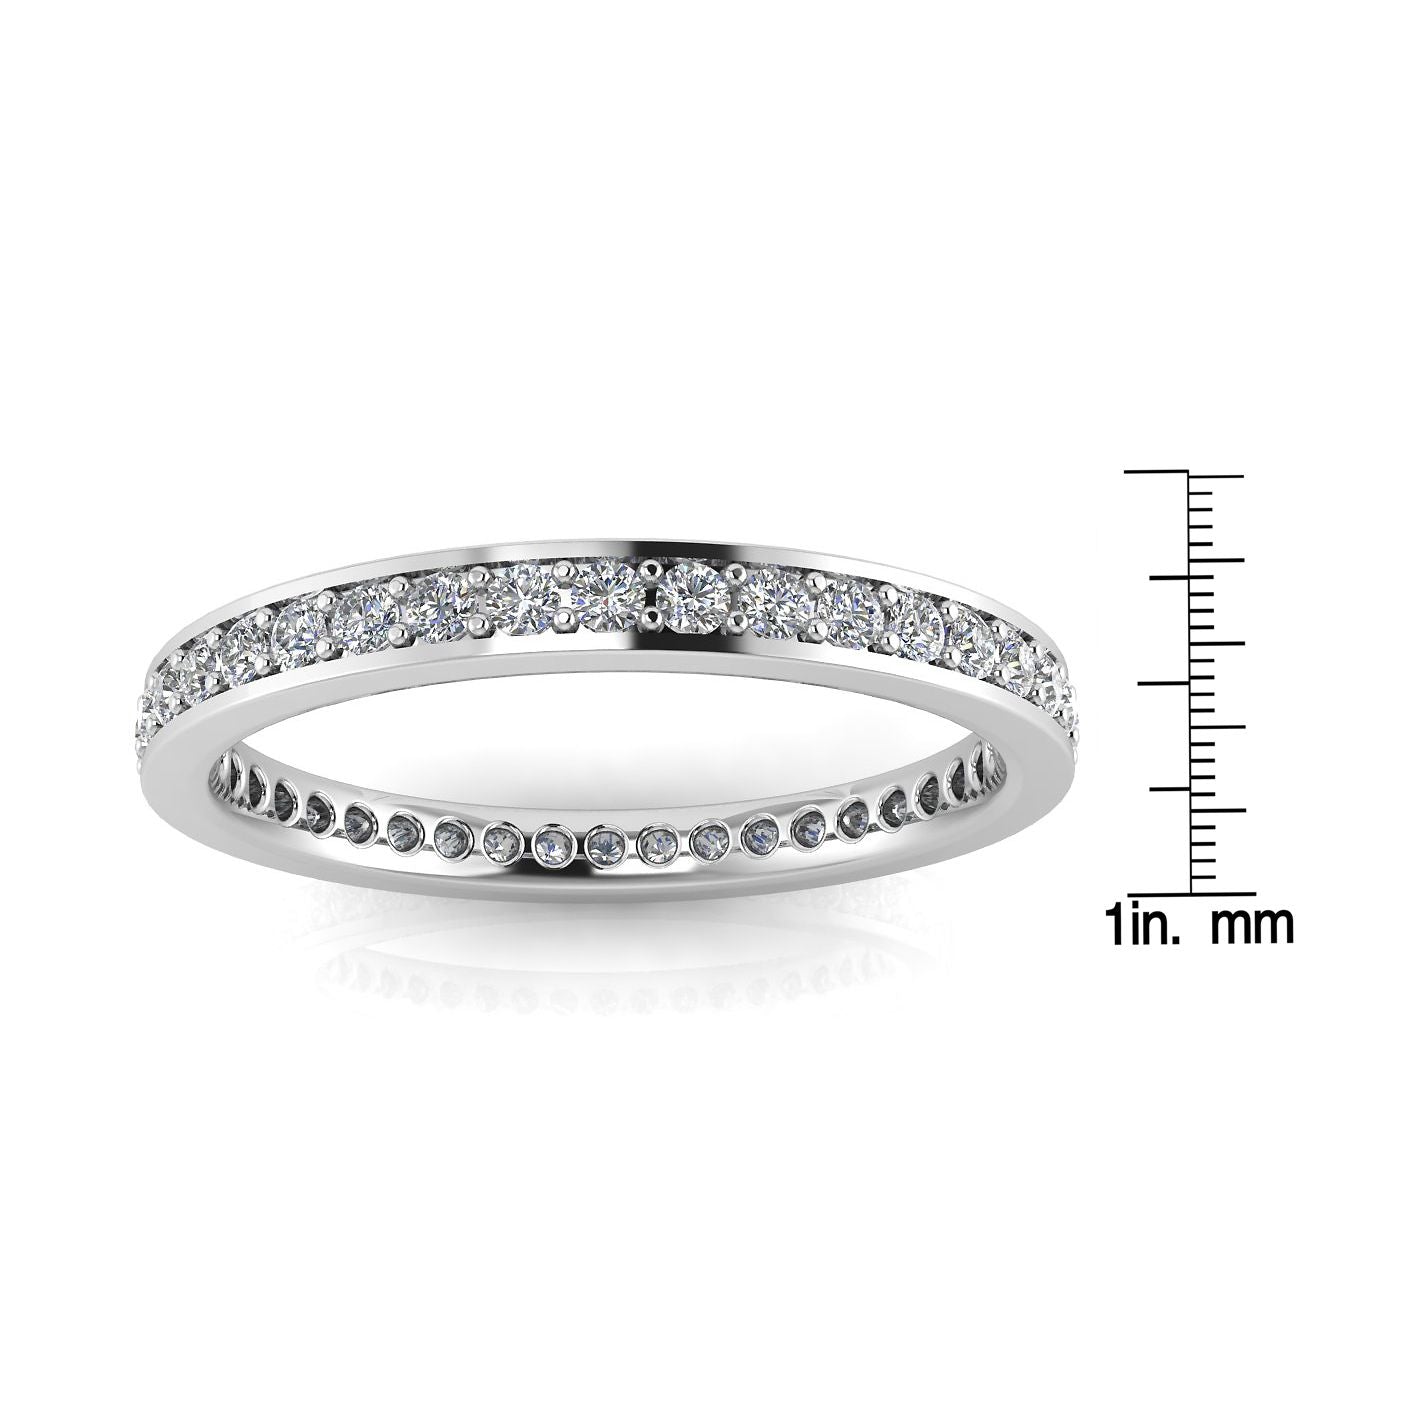 Round Brilliant Cut Diamond Channel Pave Set Eternity Ring In Platinum  (0.5ct. Tw.) Ring Size 7.5